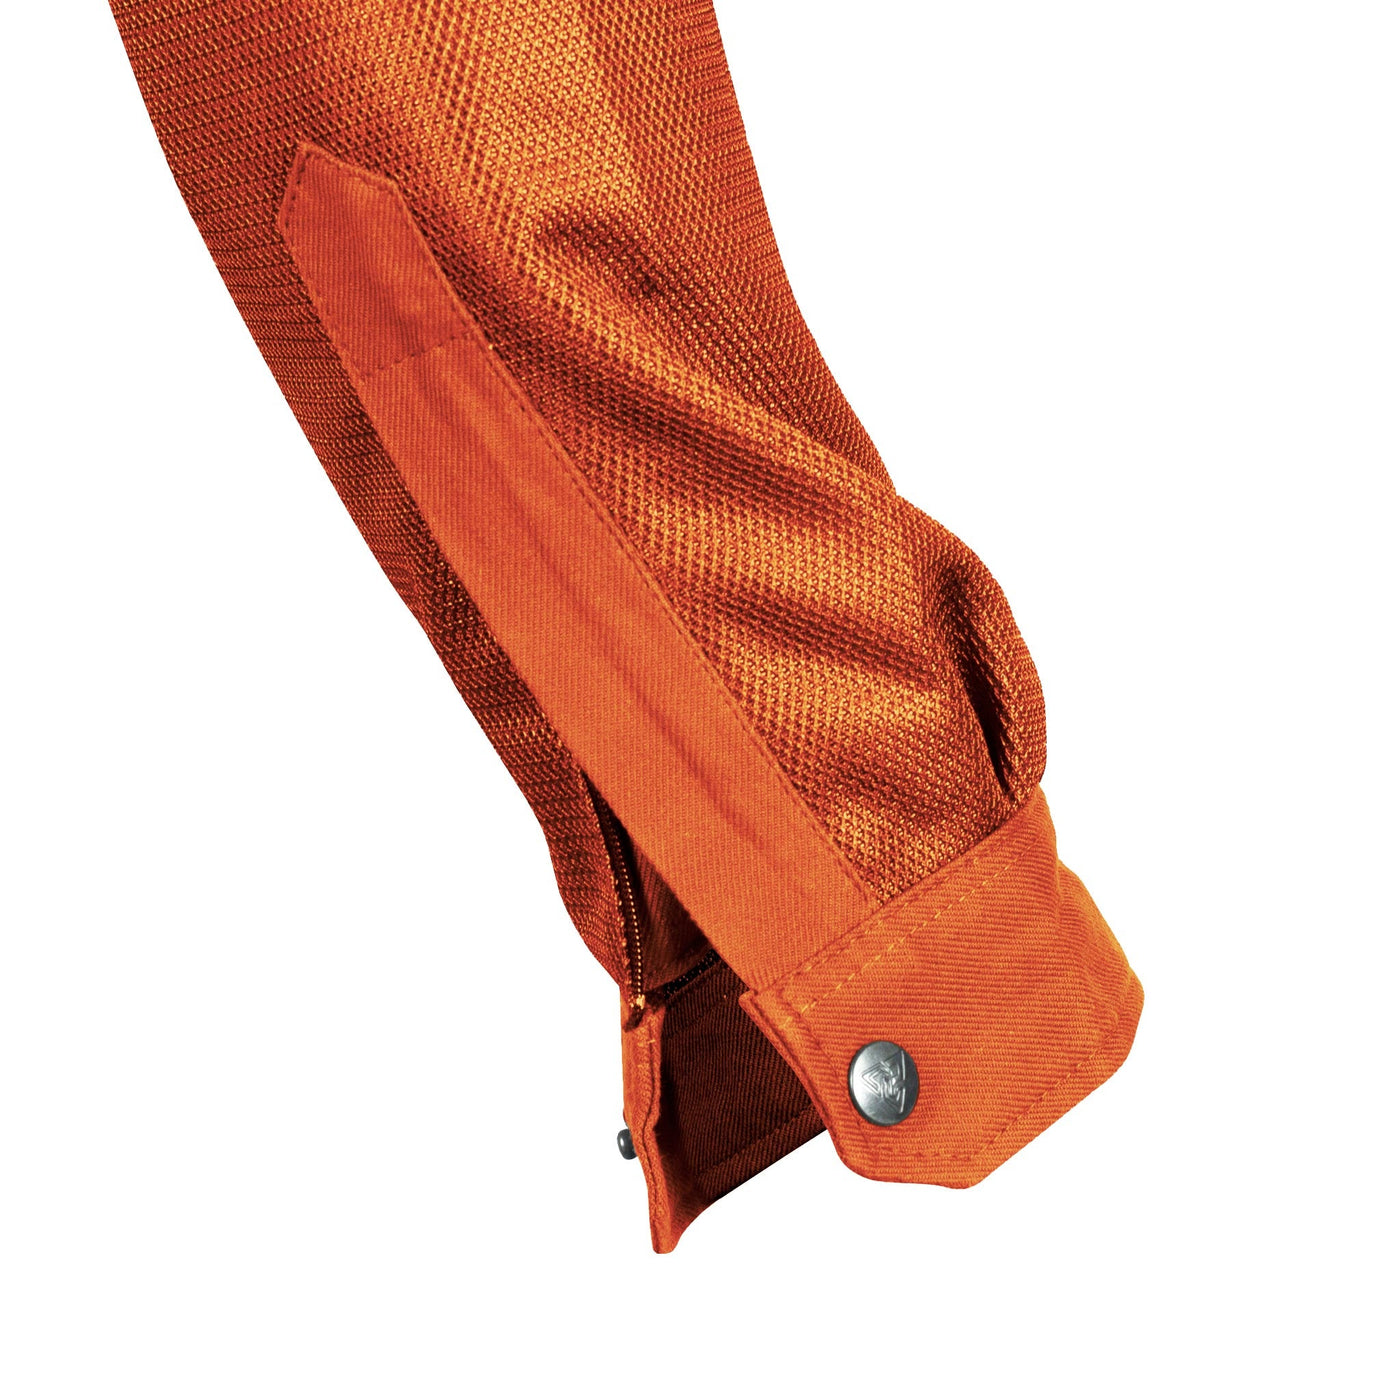 Protective Summer Mesh Shirt with Pads - Orange Solid